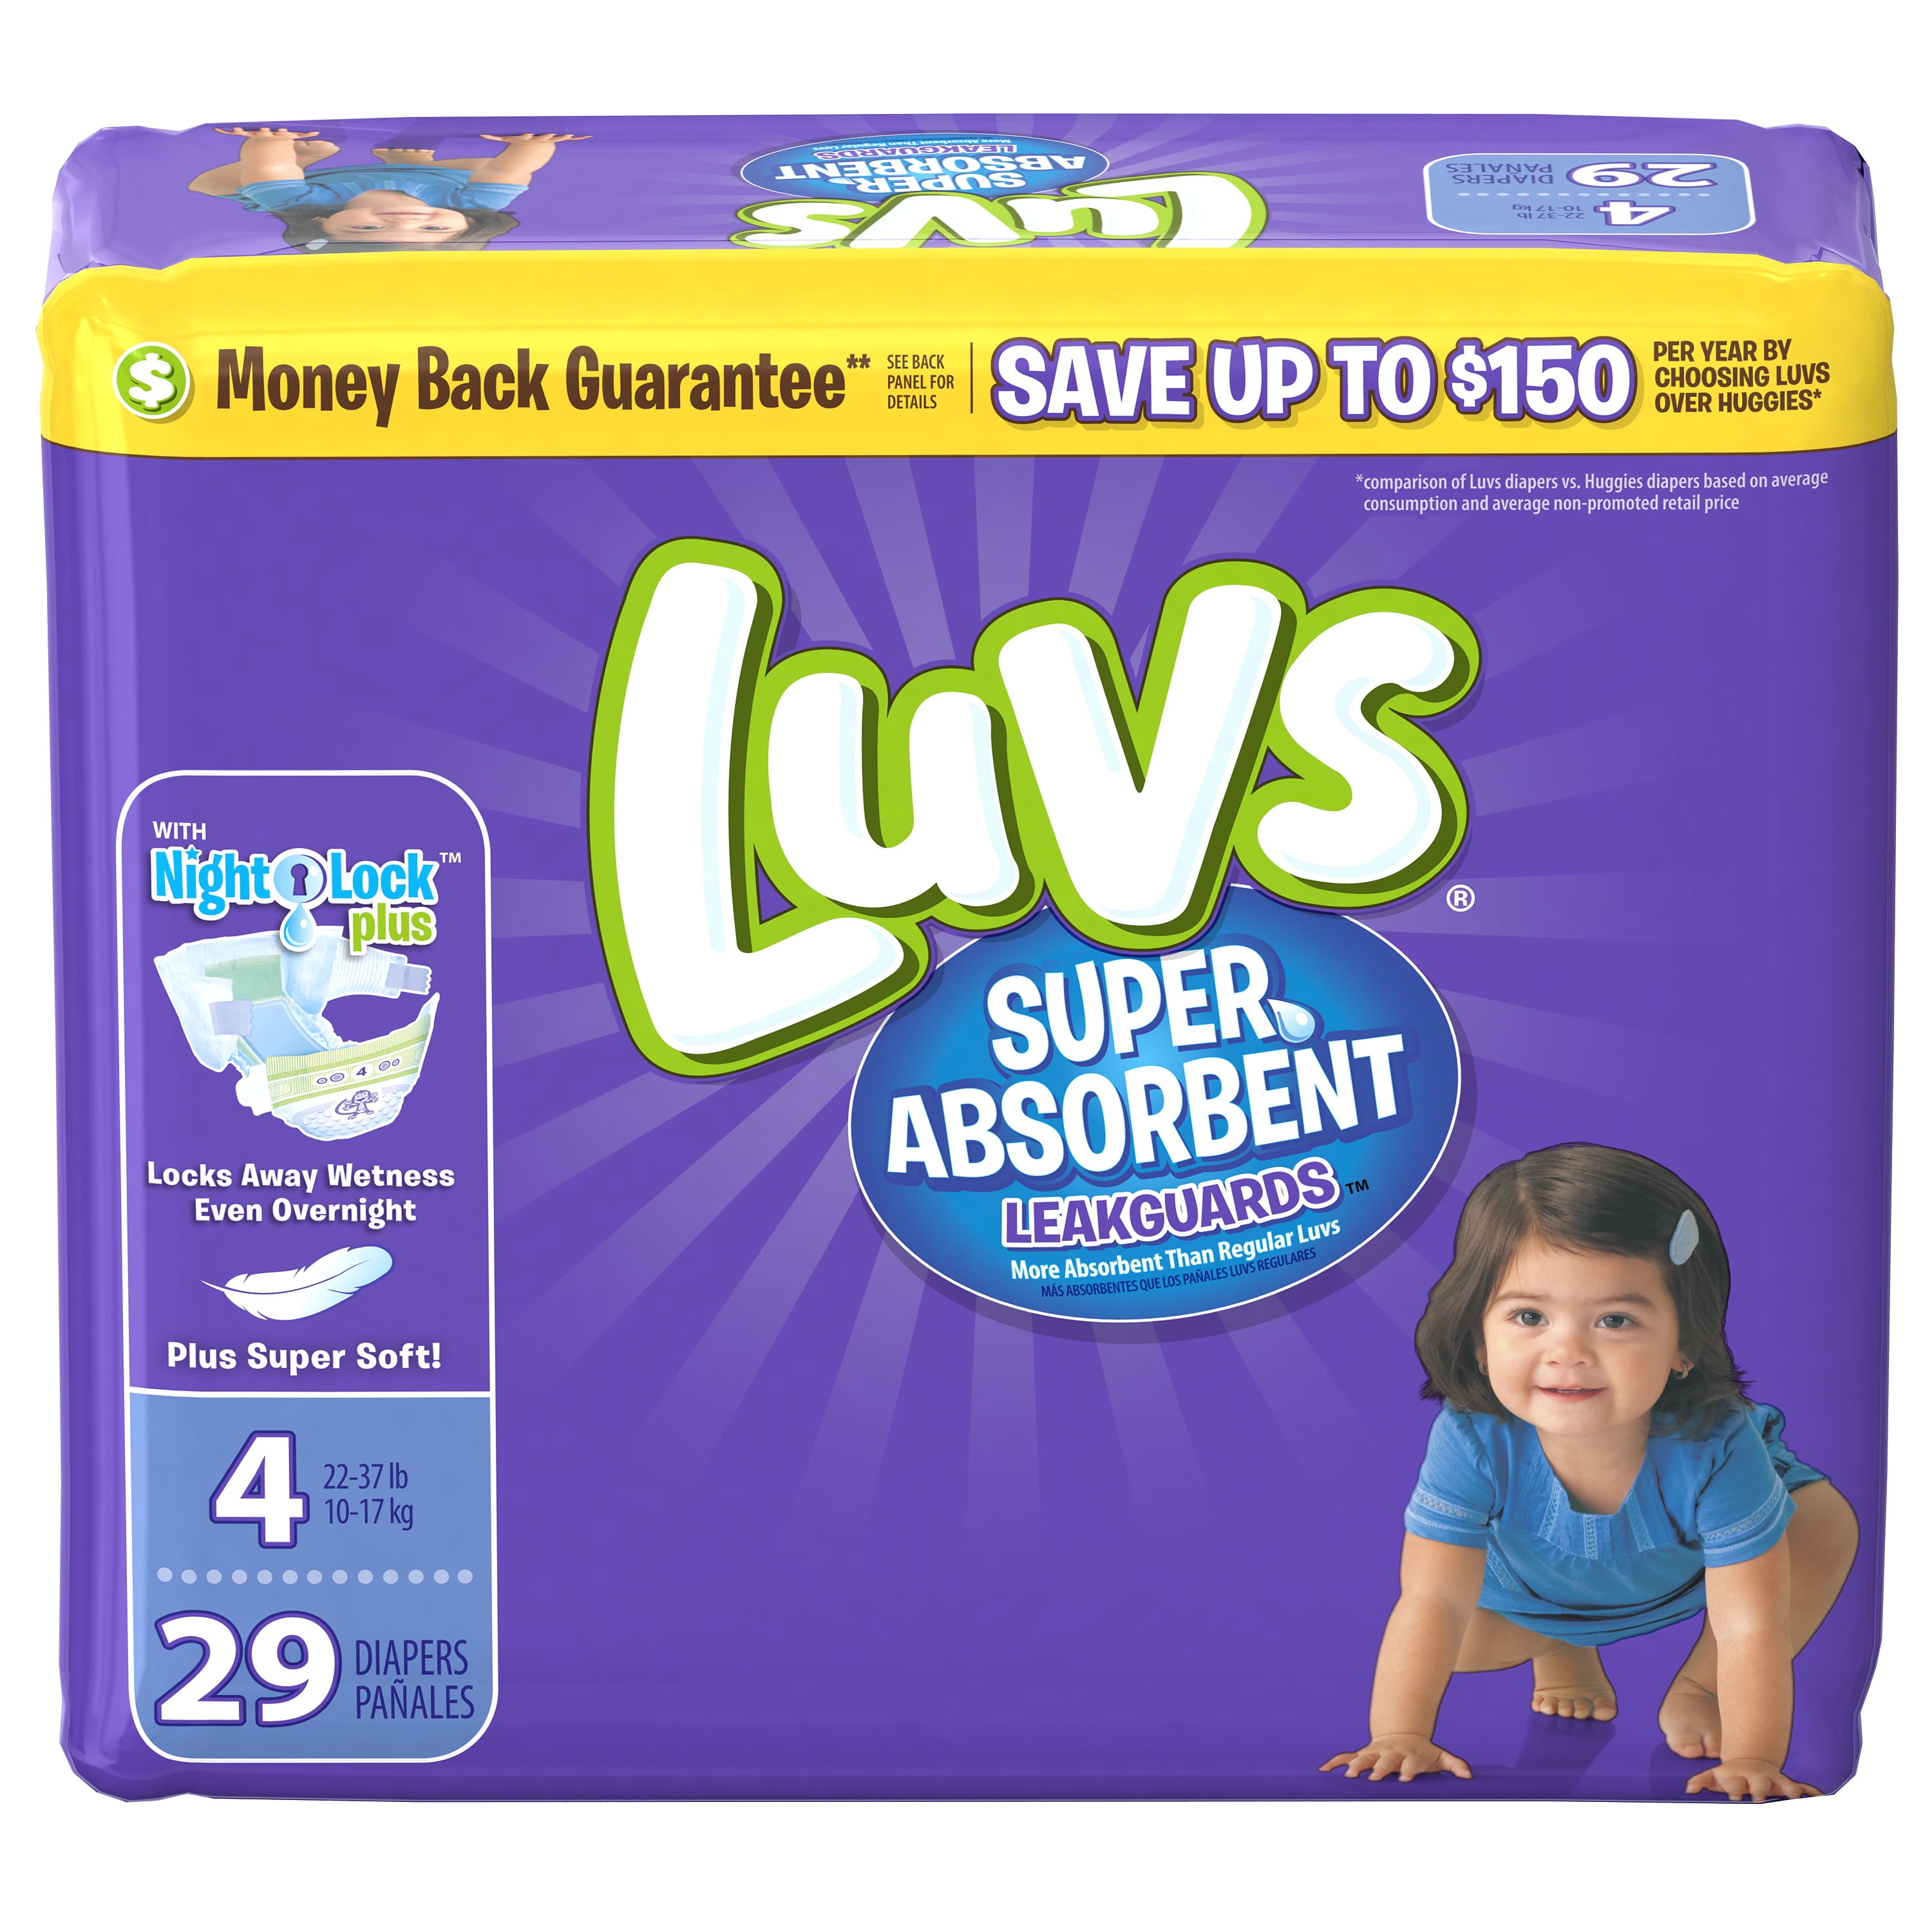 Luvs Super Absorbent Leakguards Newborn Diapers Size 4 29 count 